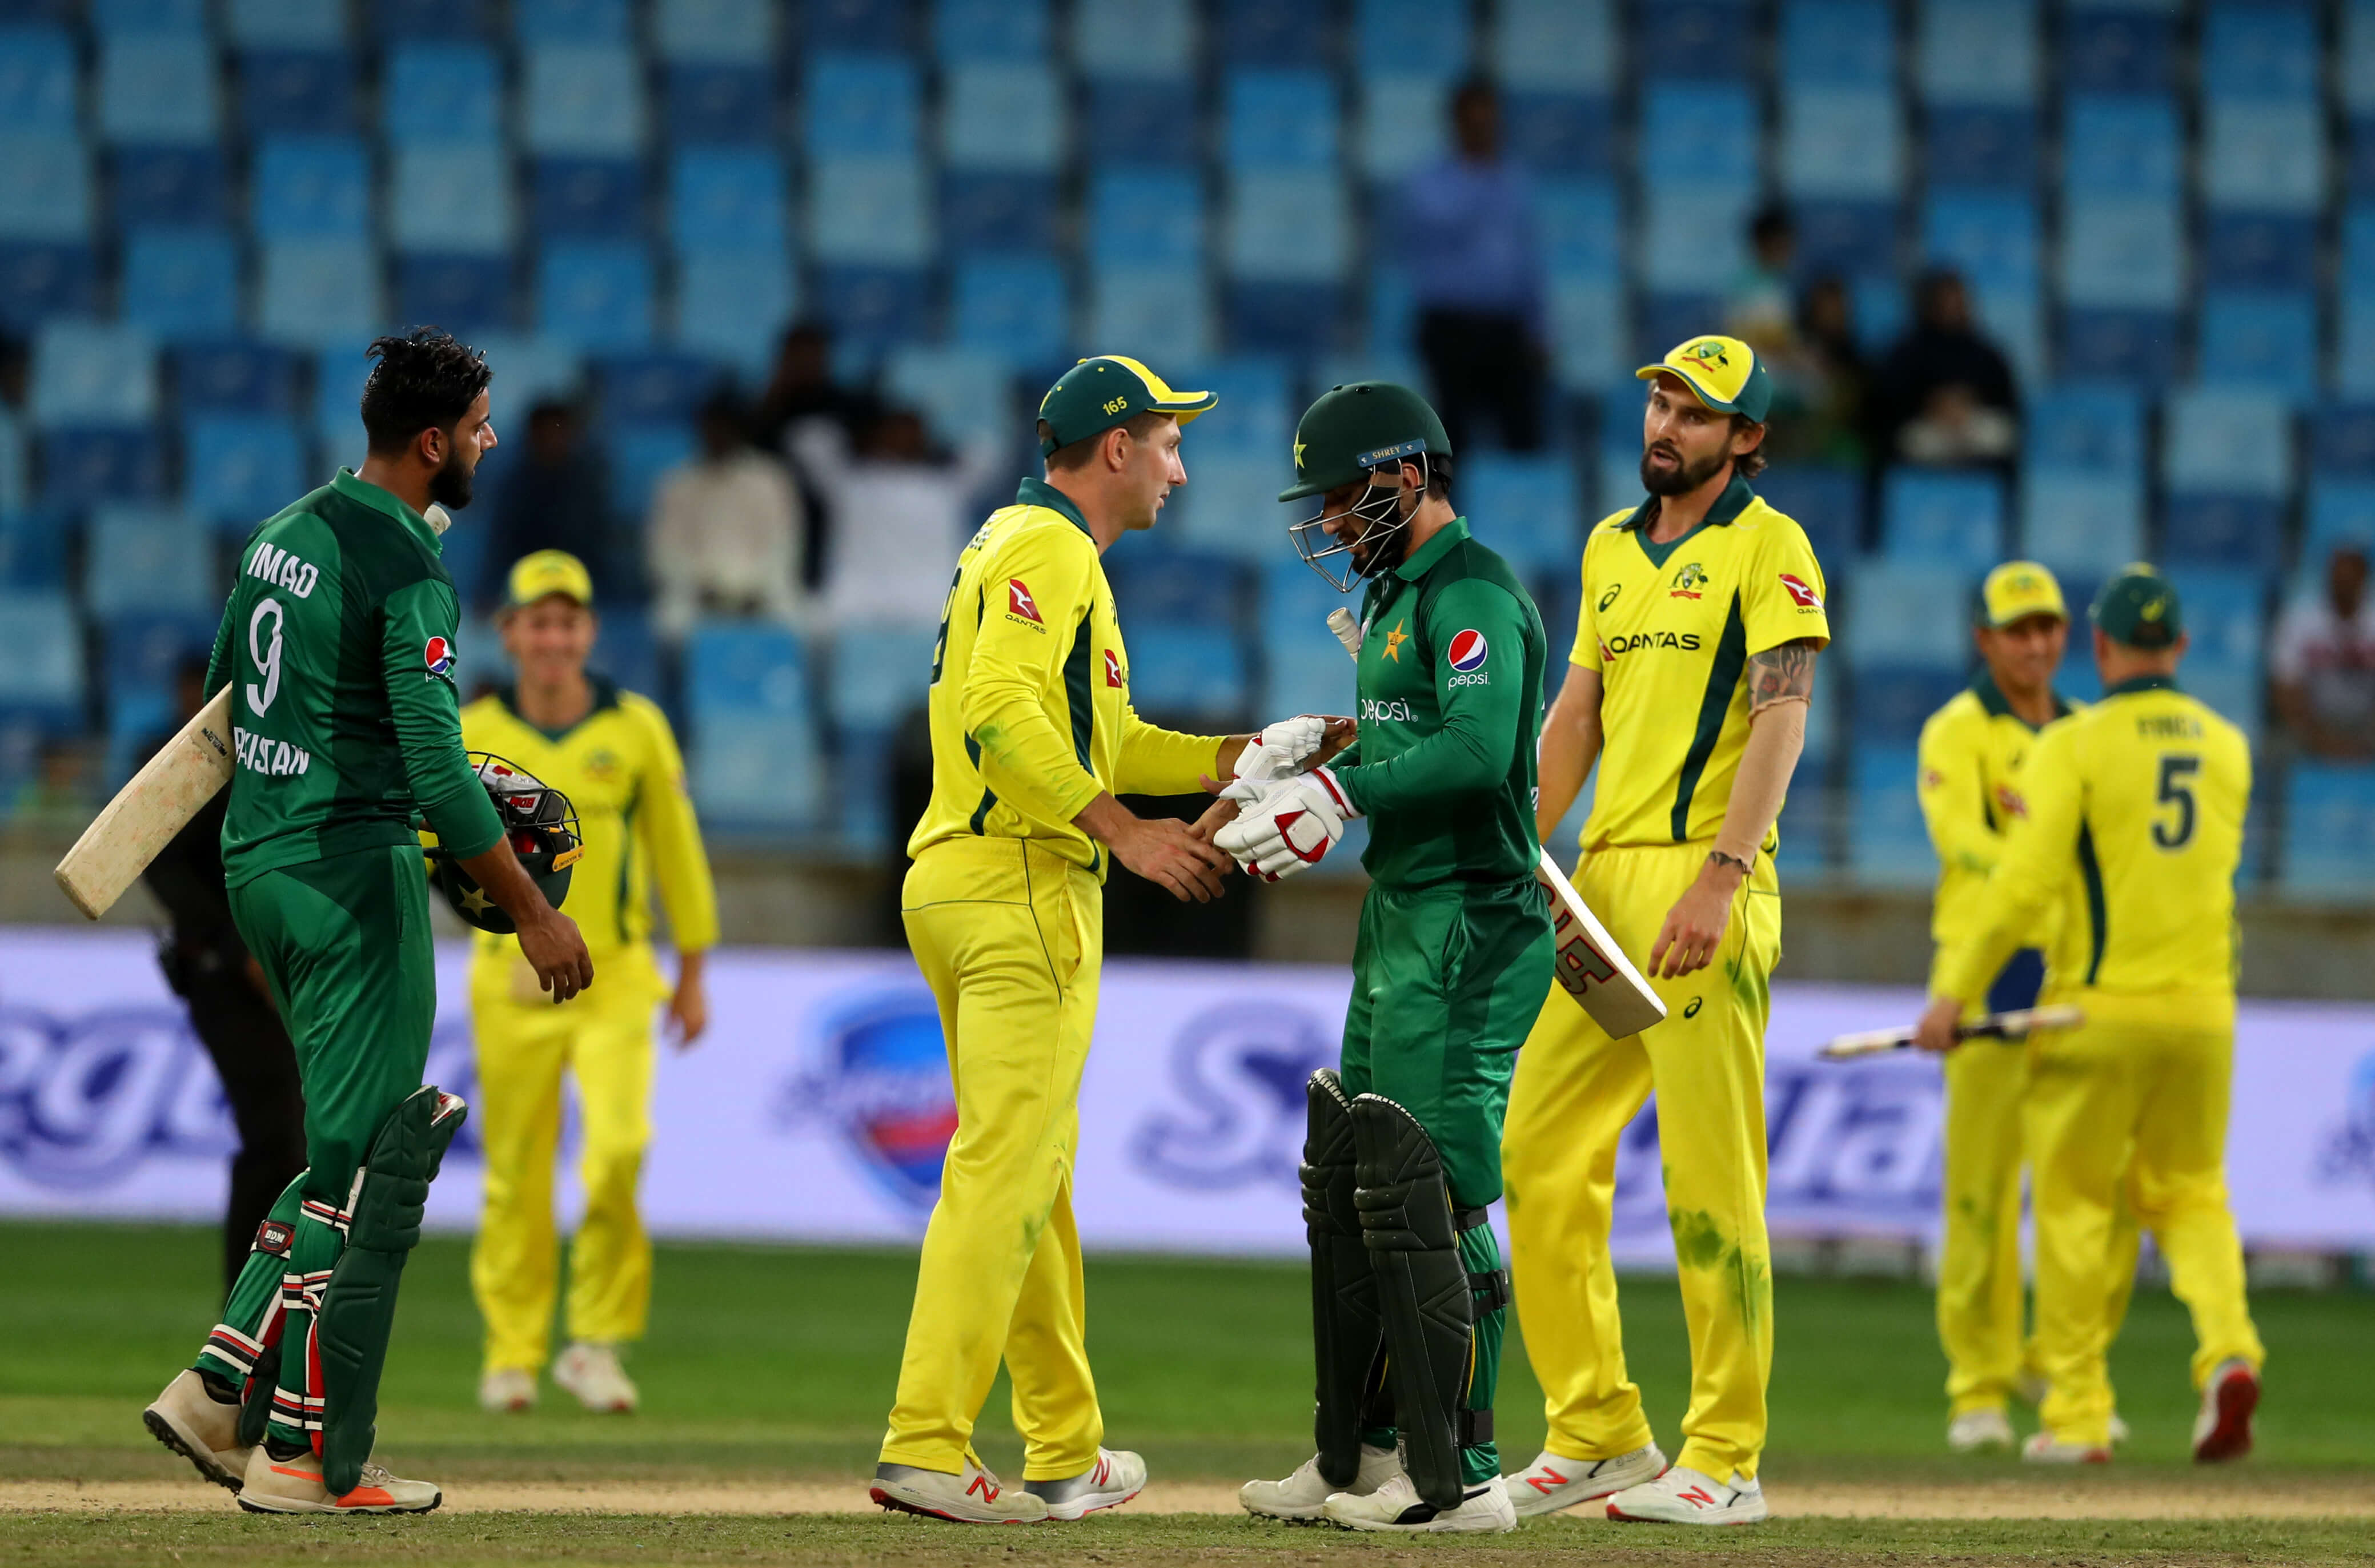 Australian Team Will Make Its Return to Pakistan After 24 Years In March 2022